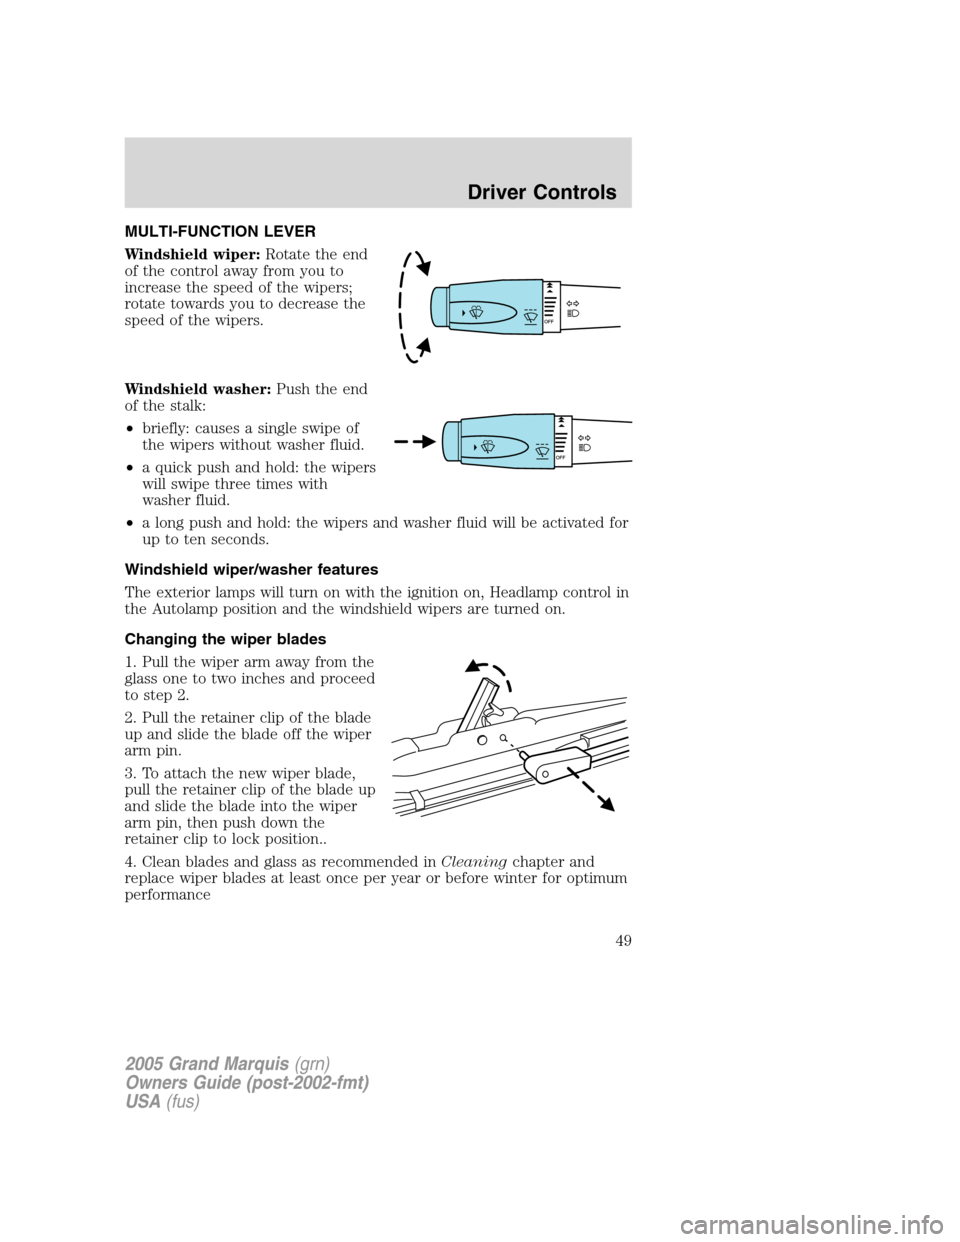 Mercury Grand Marquis 2005  s Service Manual MULTI-FUNCTION LEVER
Windshield wiper:Rotate the end
of the control away from you to
increase the speed of the wipers;
rotate towards you to decrease the
speed of the wipers.
Windshield washer:Push th